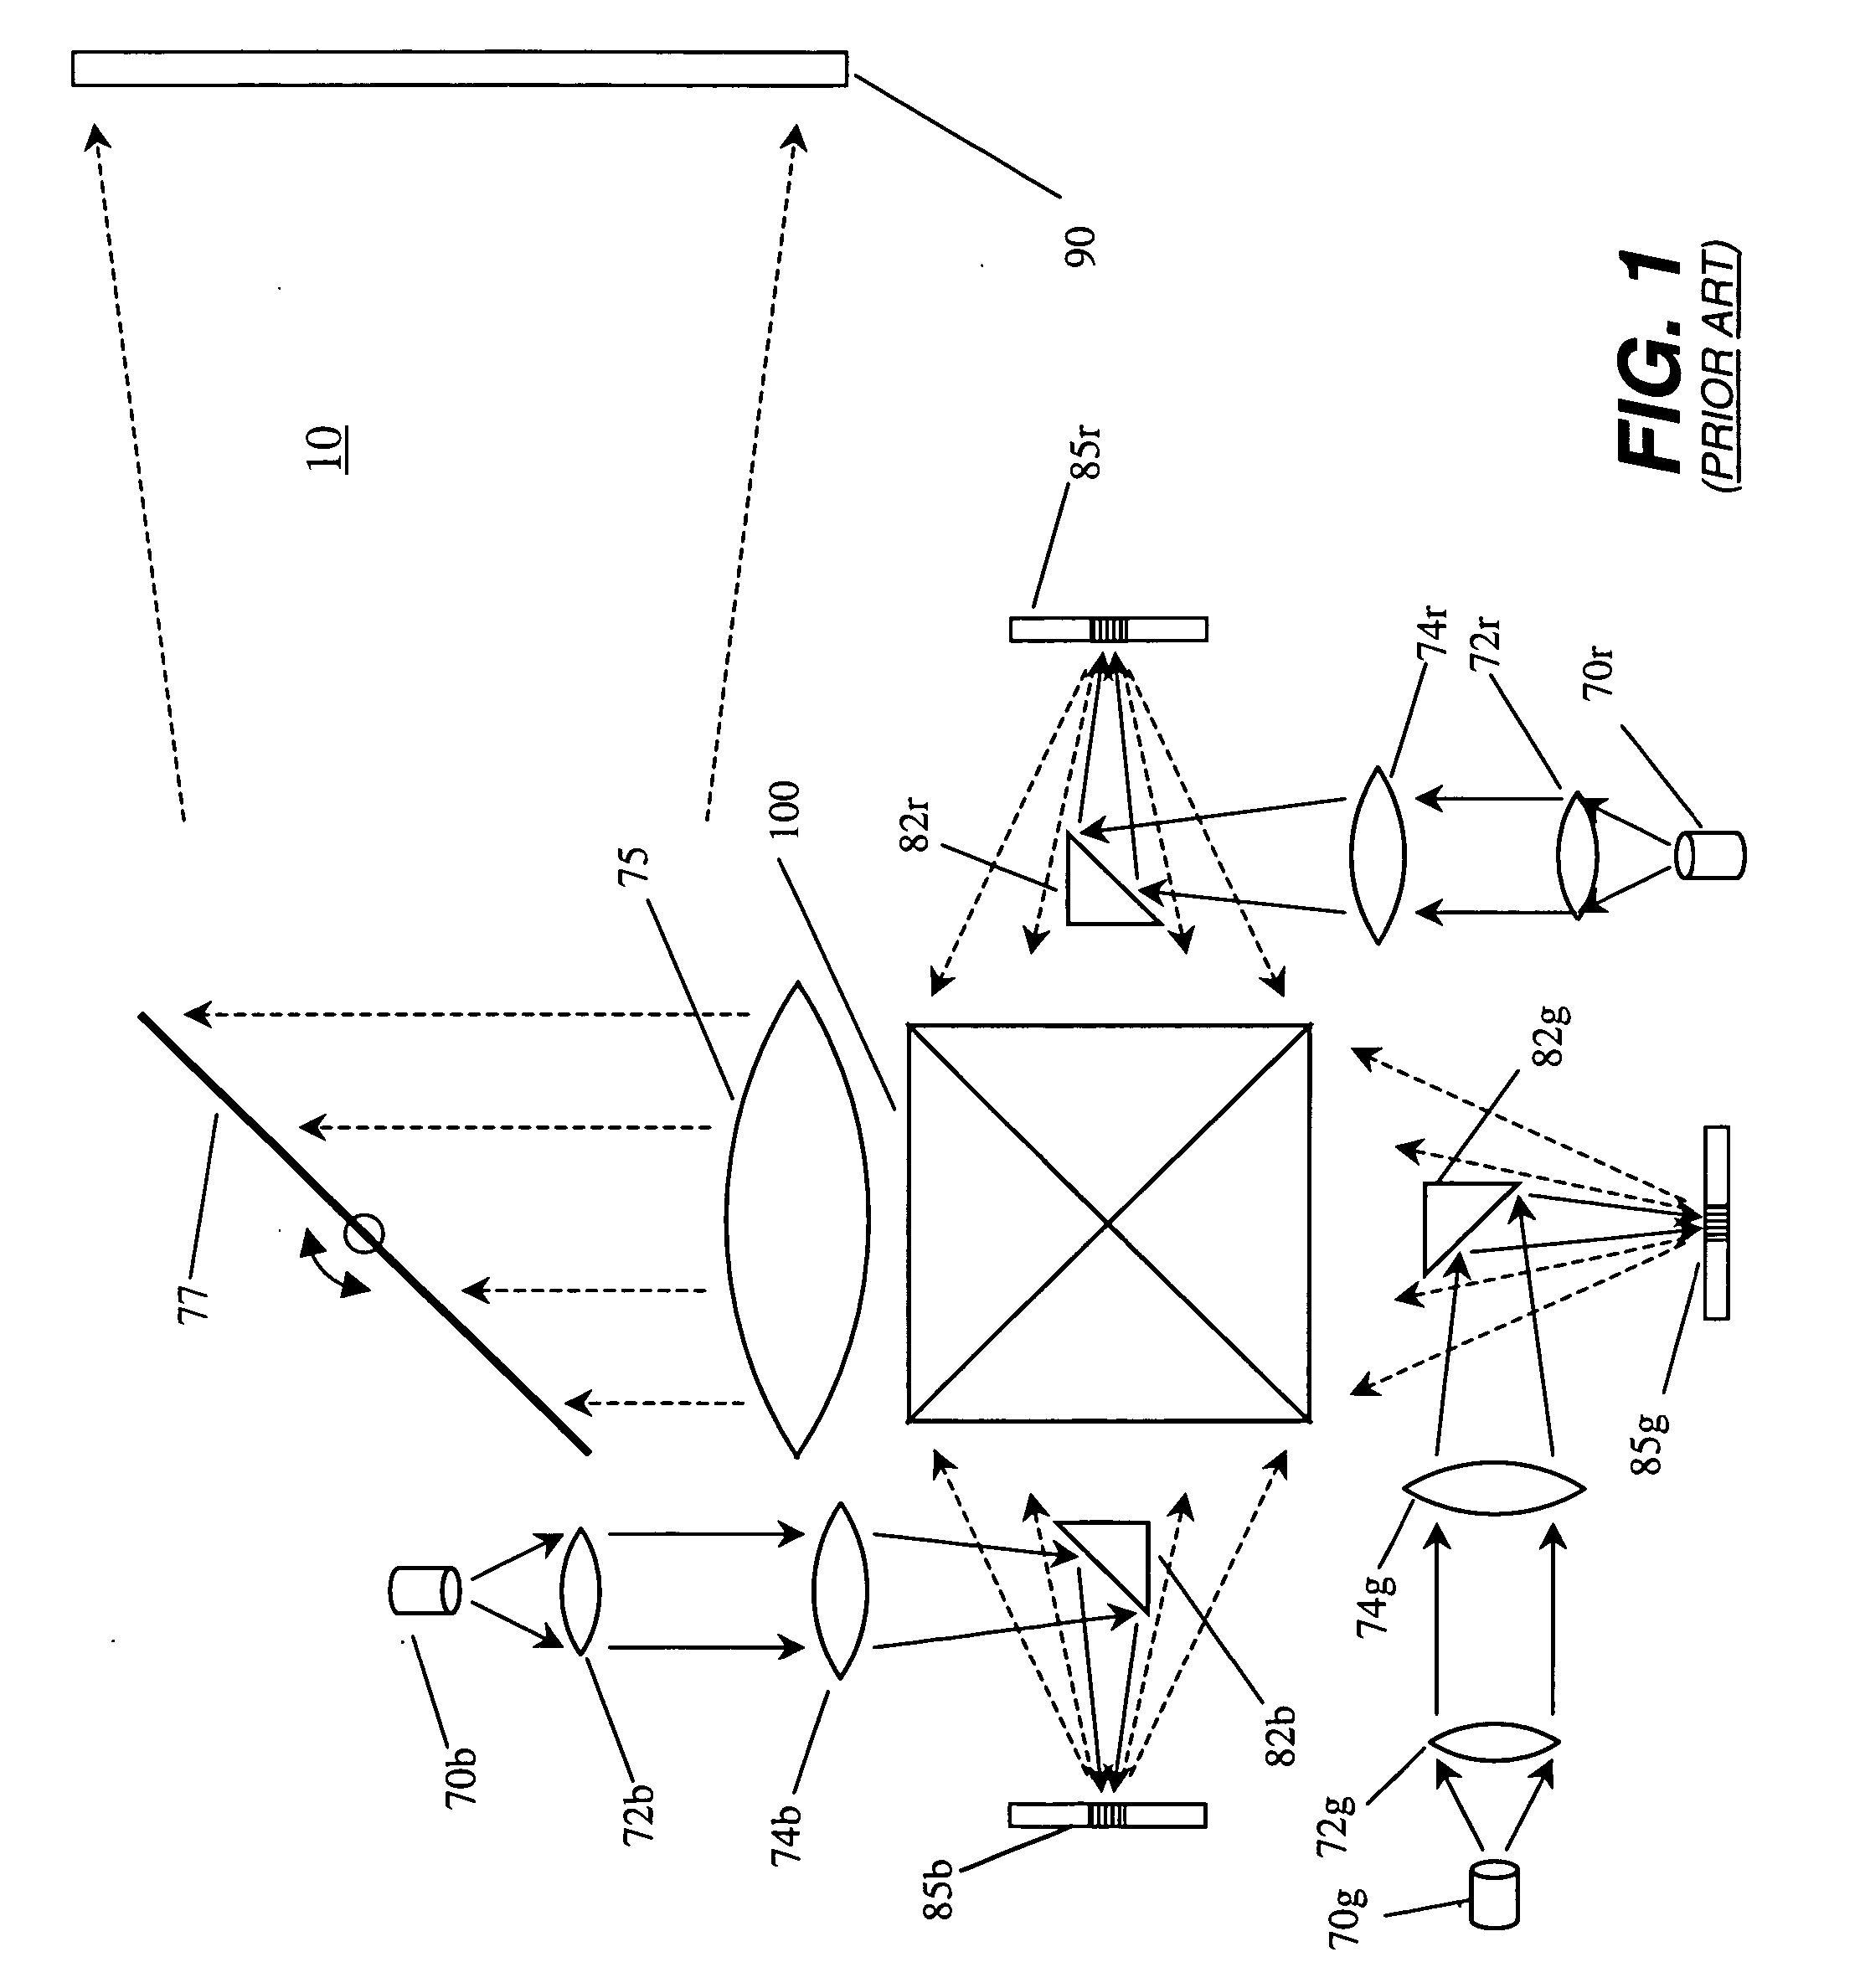 Display system incorporating bilinear electromechanical grating device